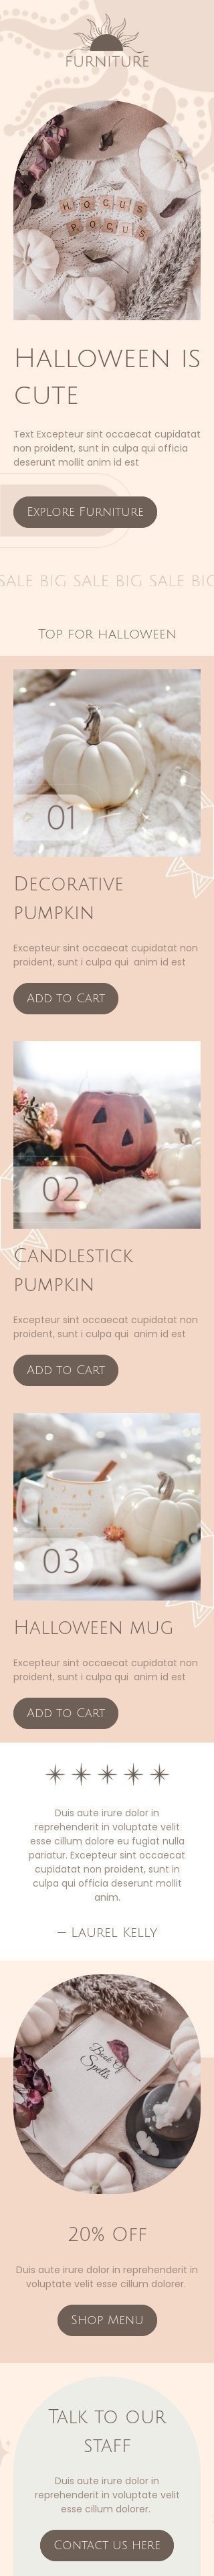 Halloween Email Template "Halloween is cute" for Furniture, Interior & DIY industry mobile view